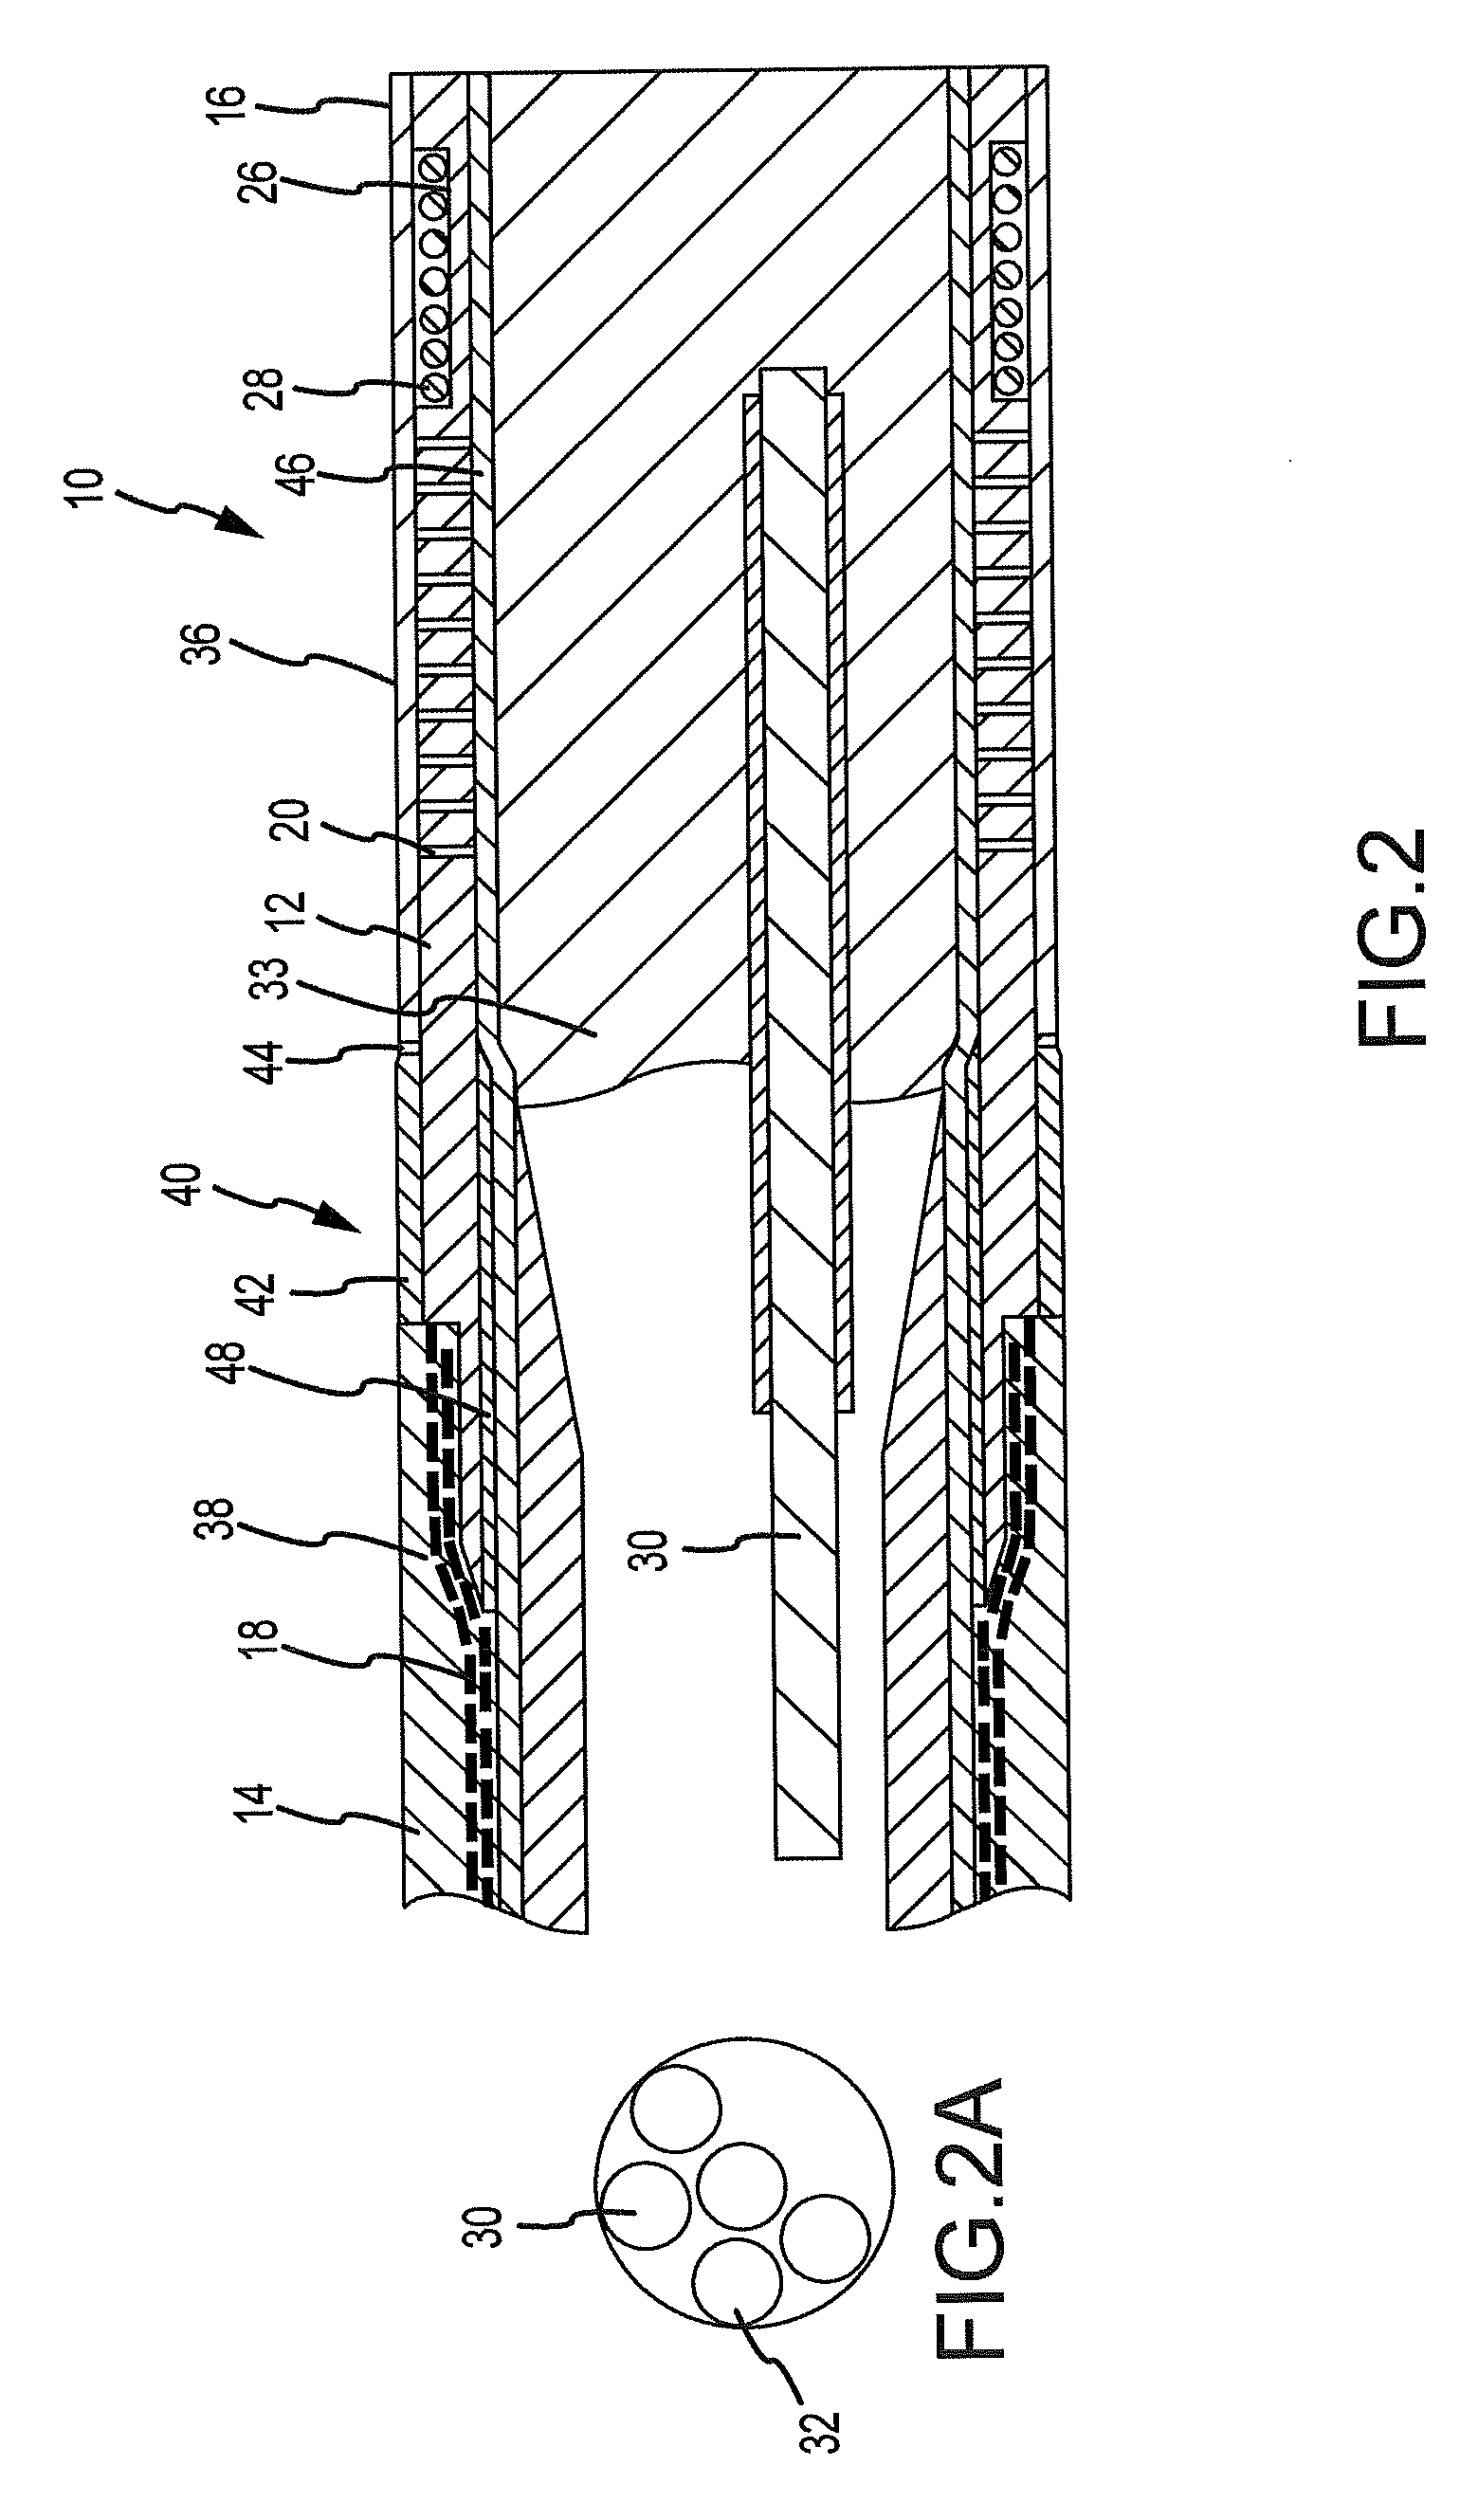 Longitudinally incompressible, laterally flexible interior shaft for catheter